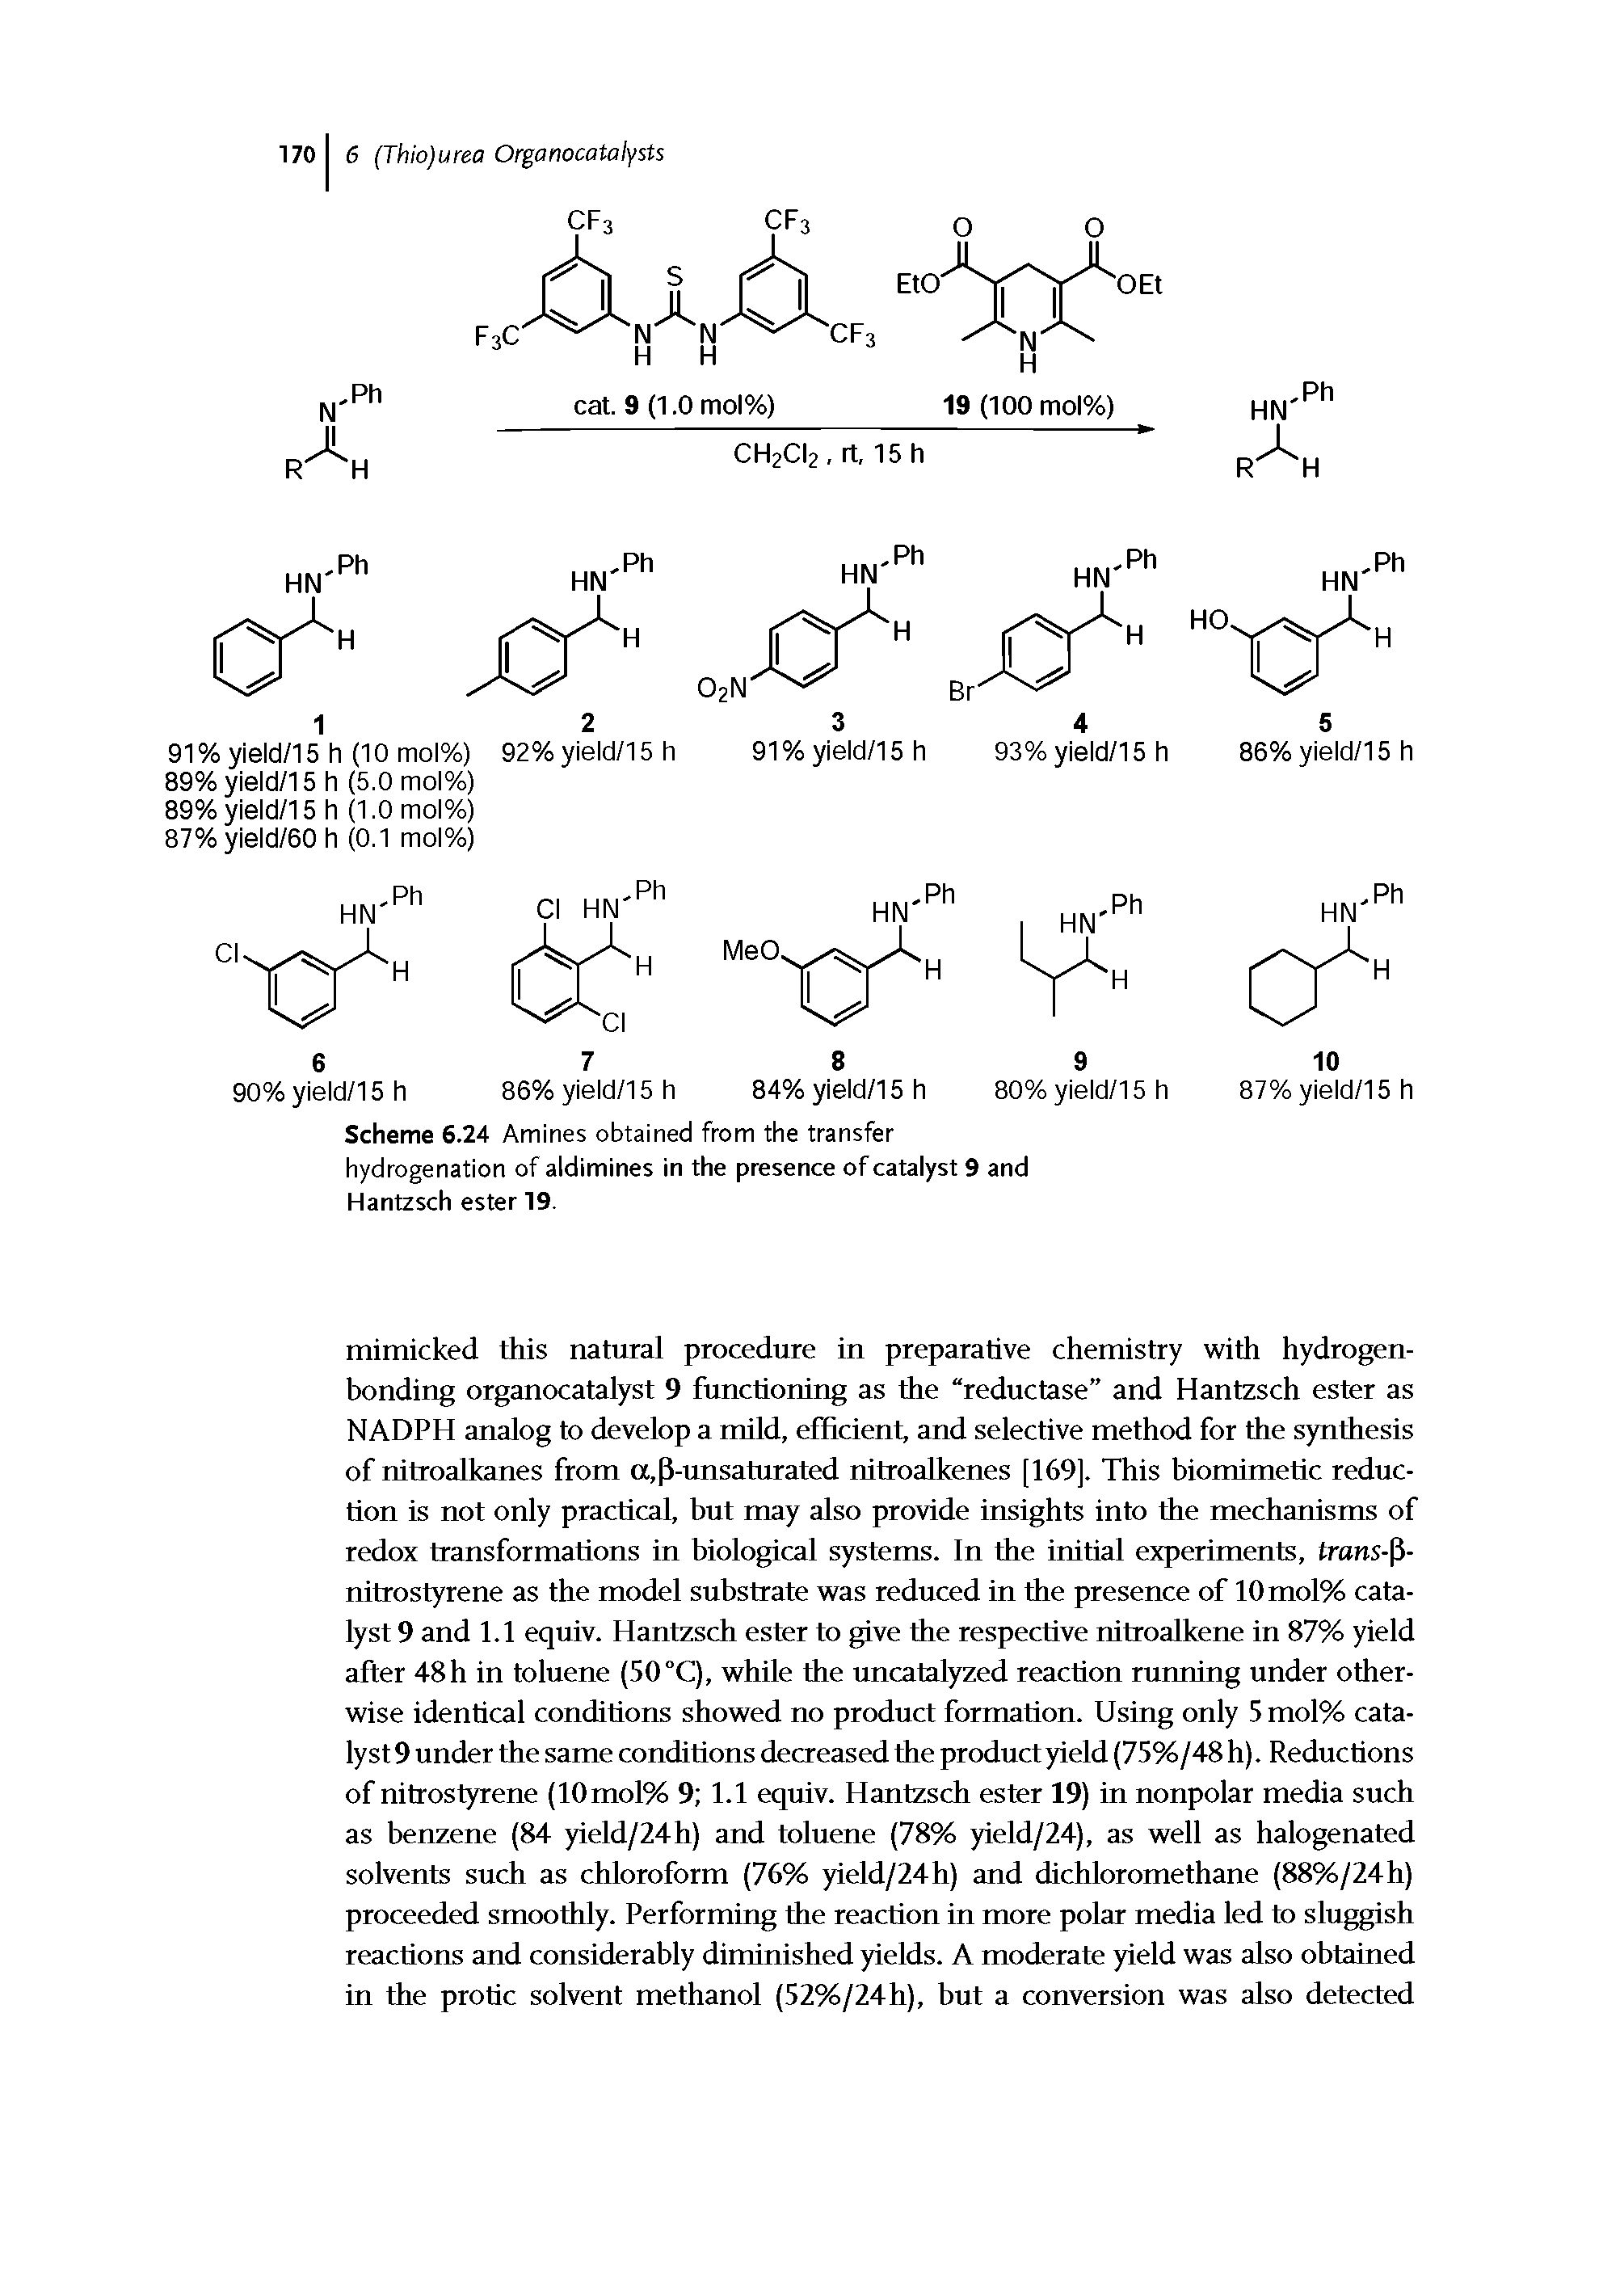 Scheme 6.24 Amines obtained from the transfer hydrogenation of aldimines in the presence of catalyst 9 and Hantzsch ester 19.